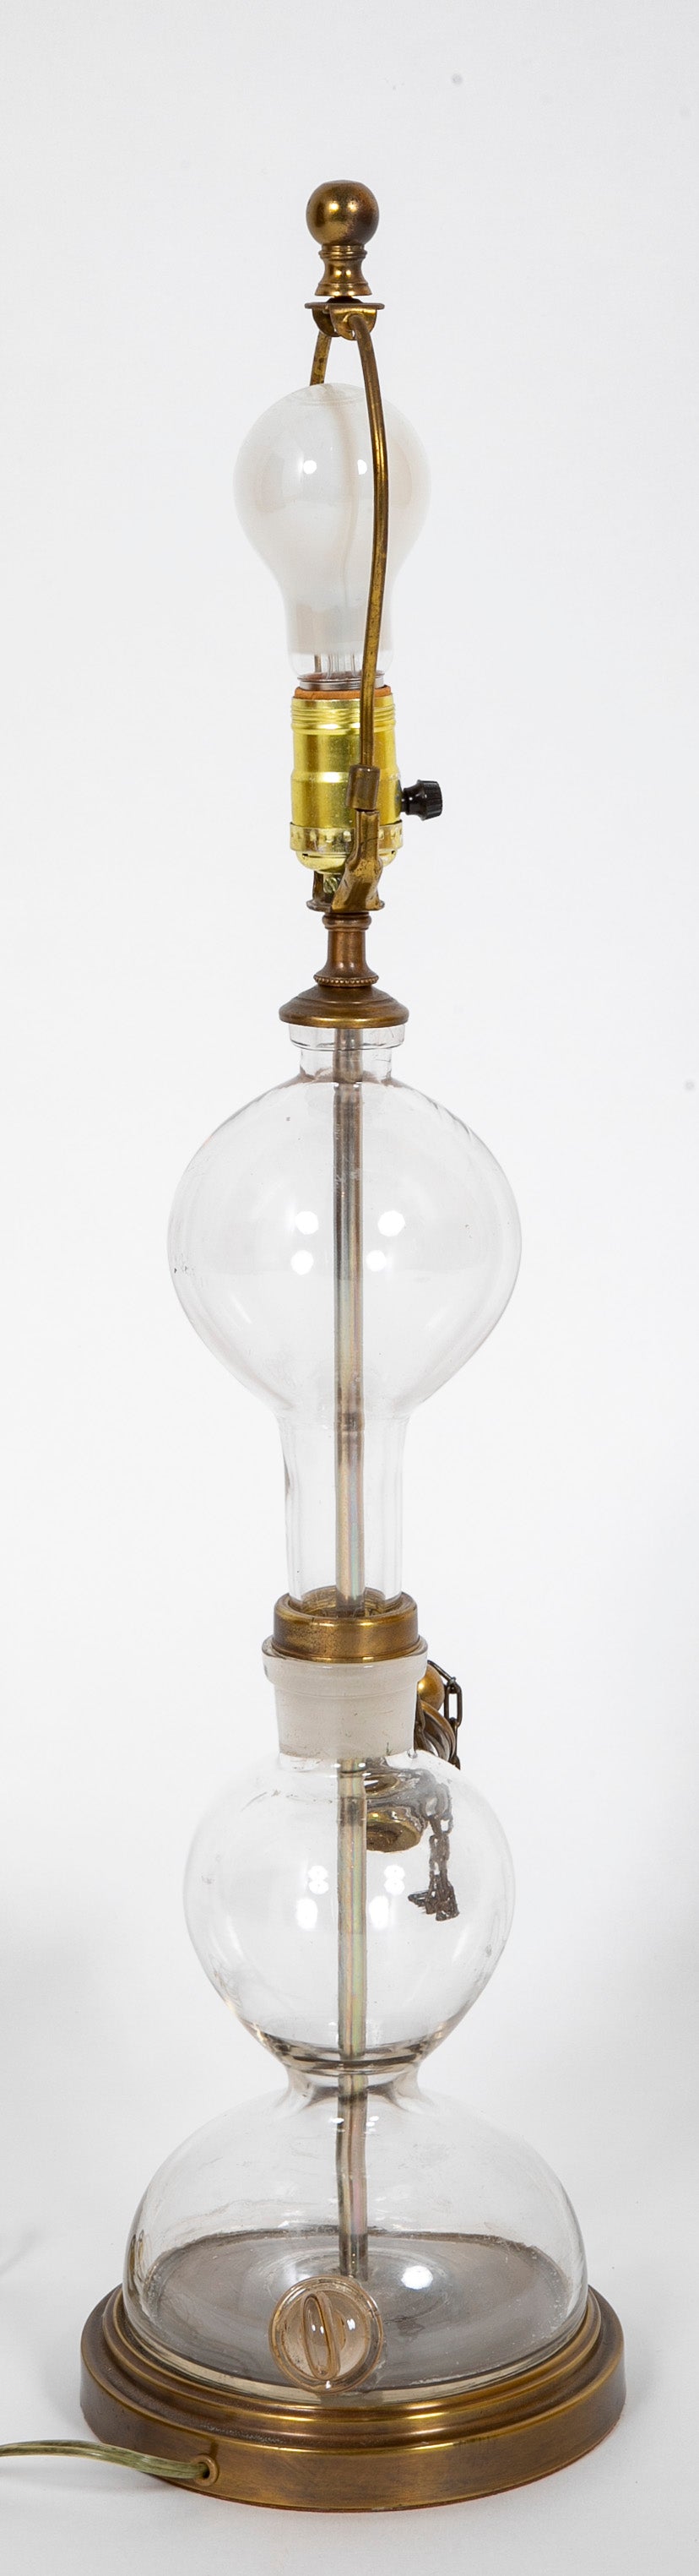 Pair of Mounted Laboratory Lamps